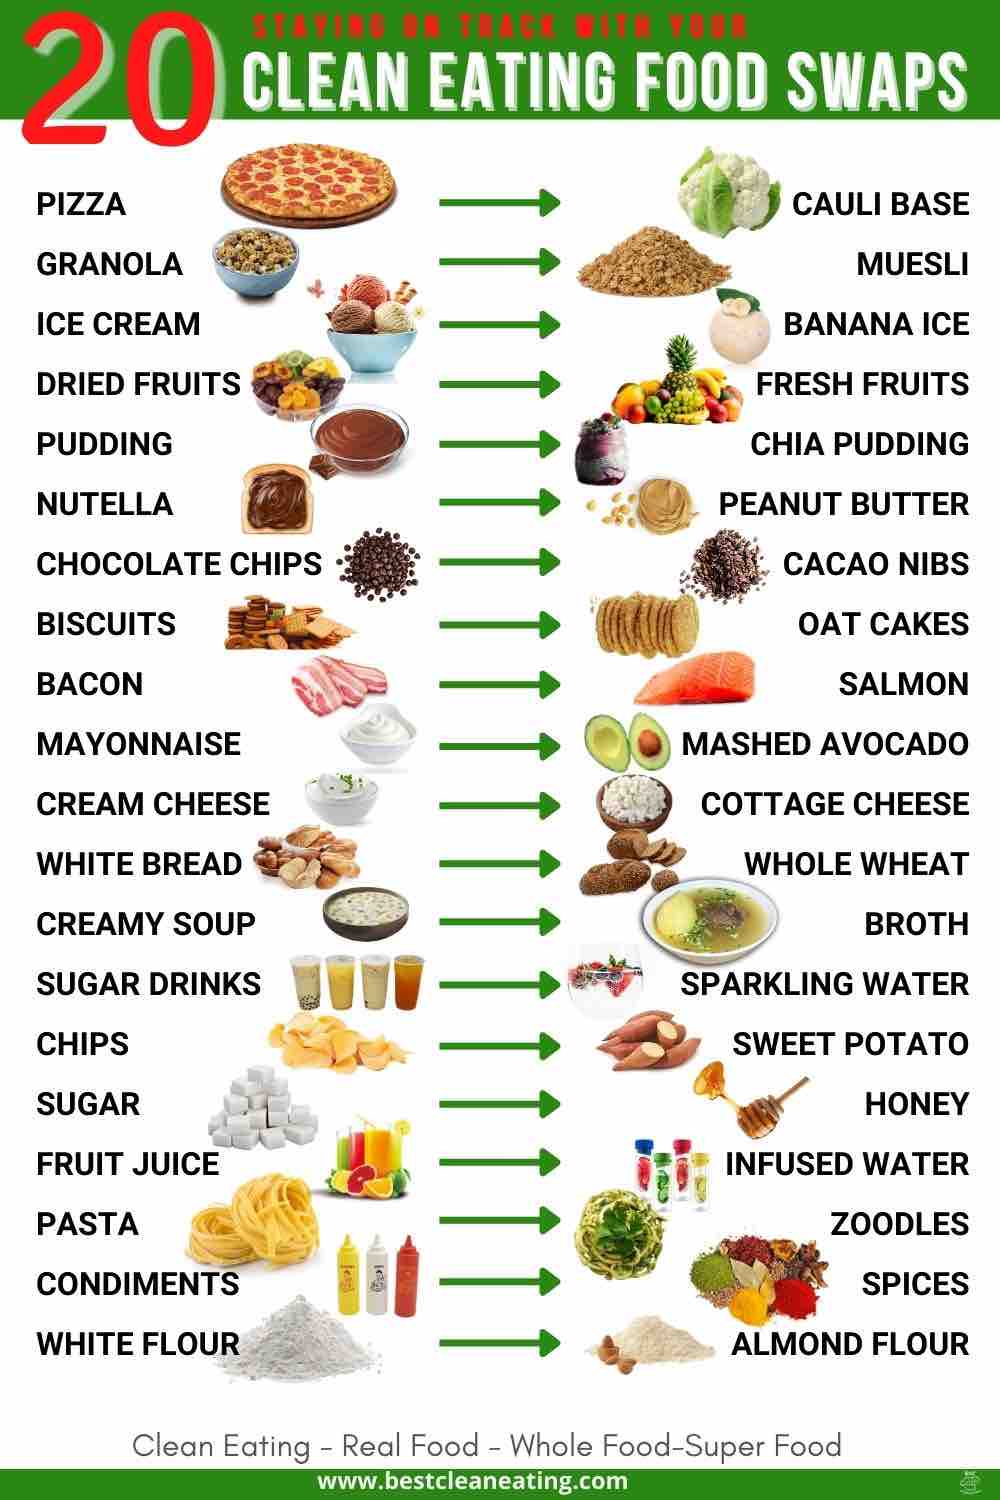 Banner with food swaps in clean eating.